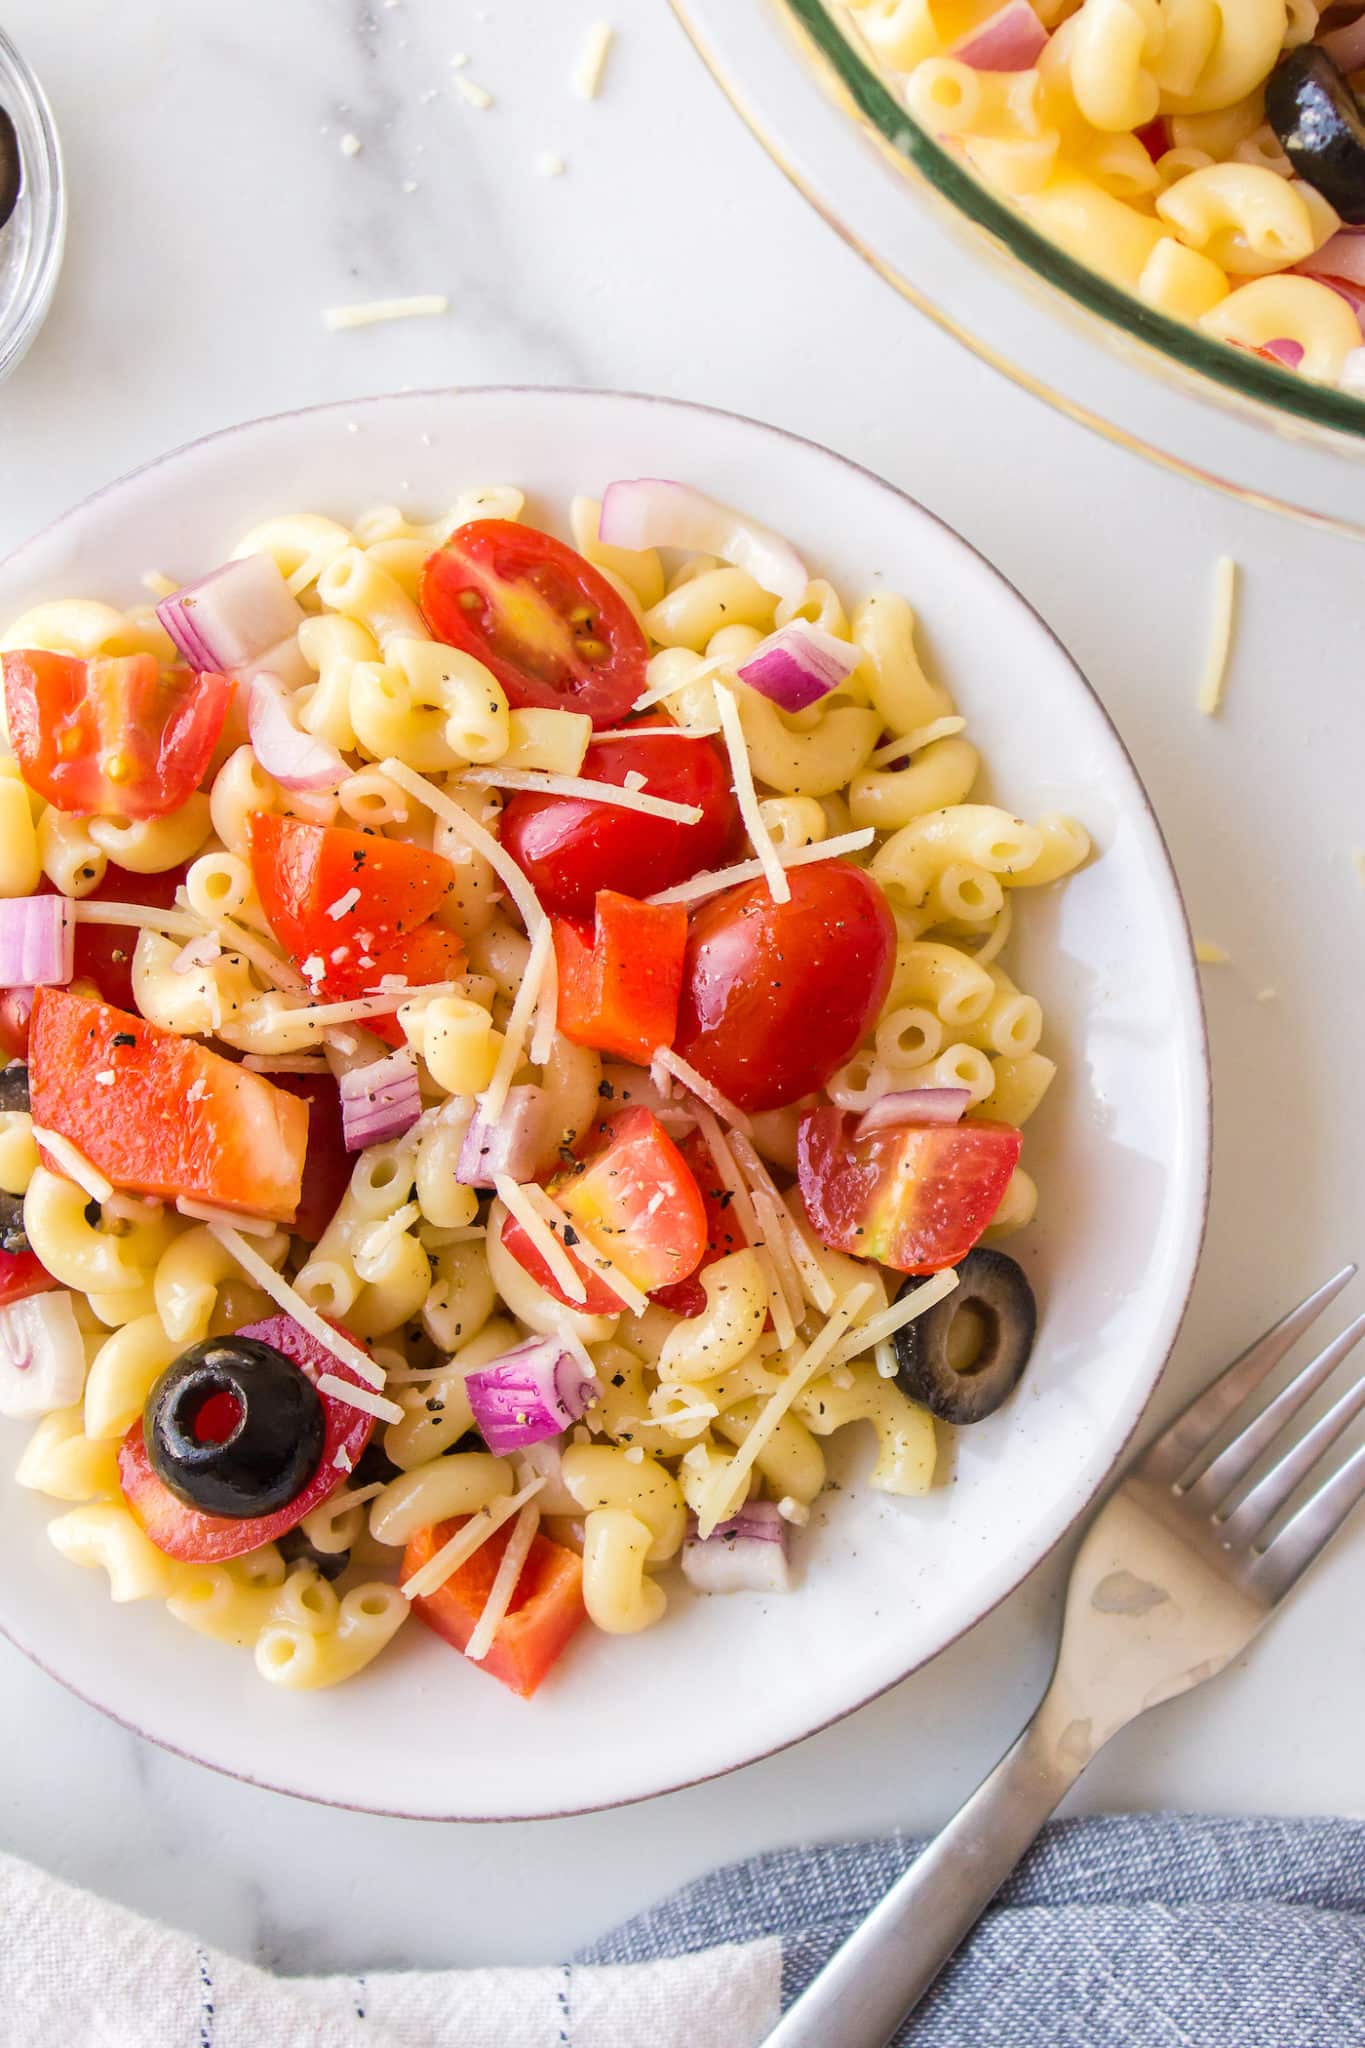 A small serving of veggie pasta salad on a small white plate.